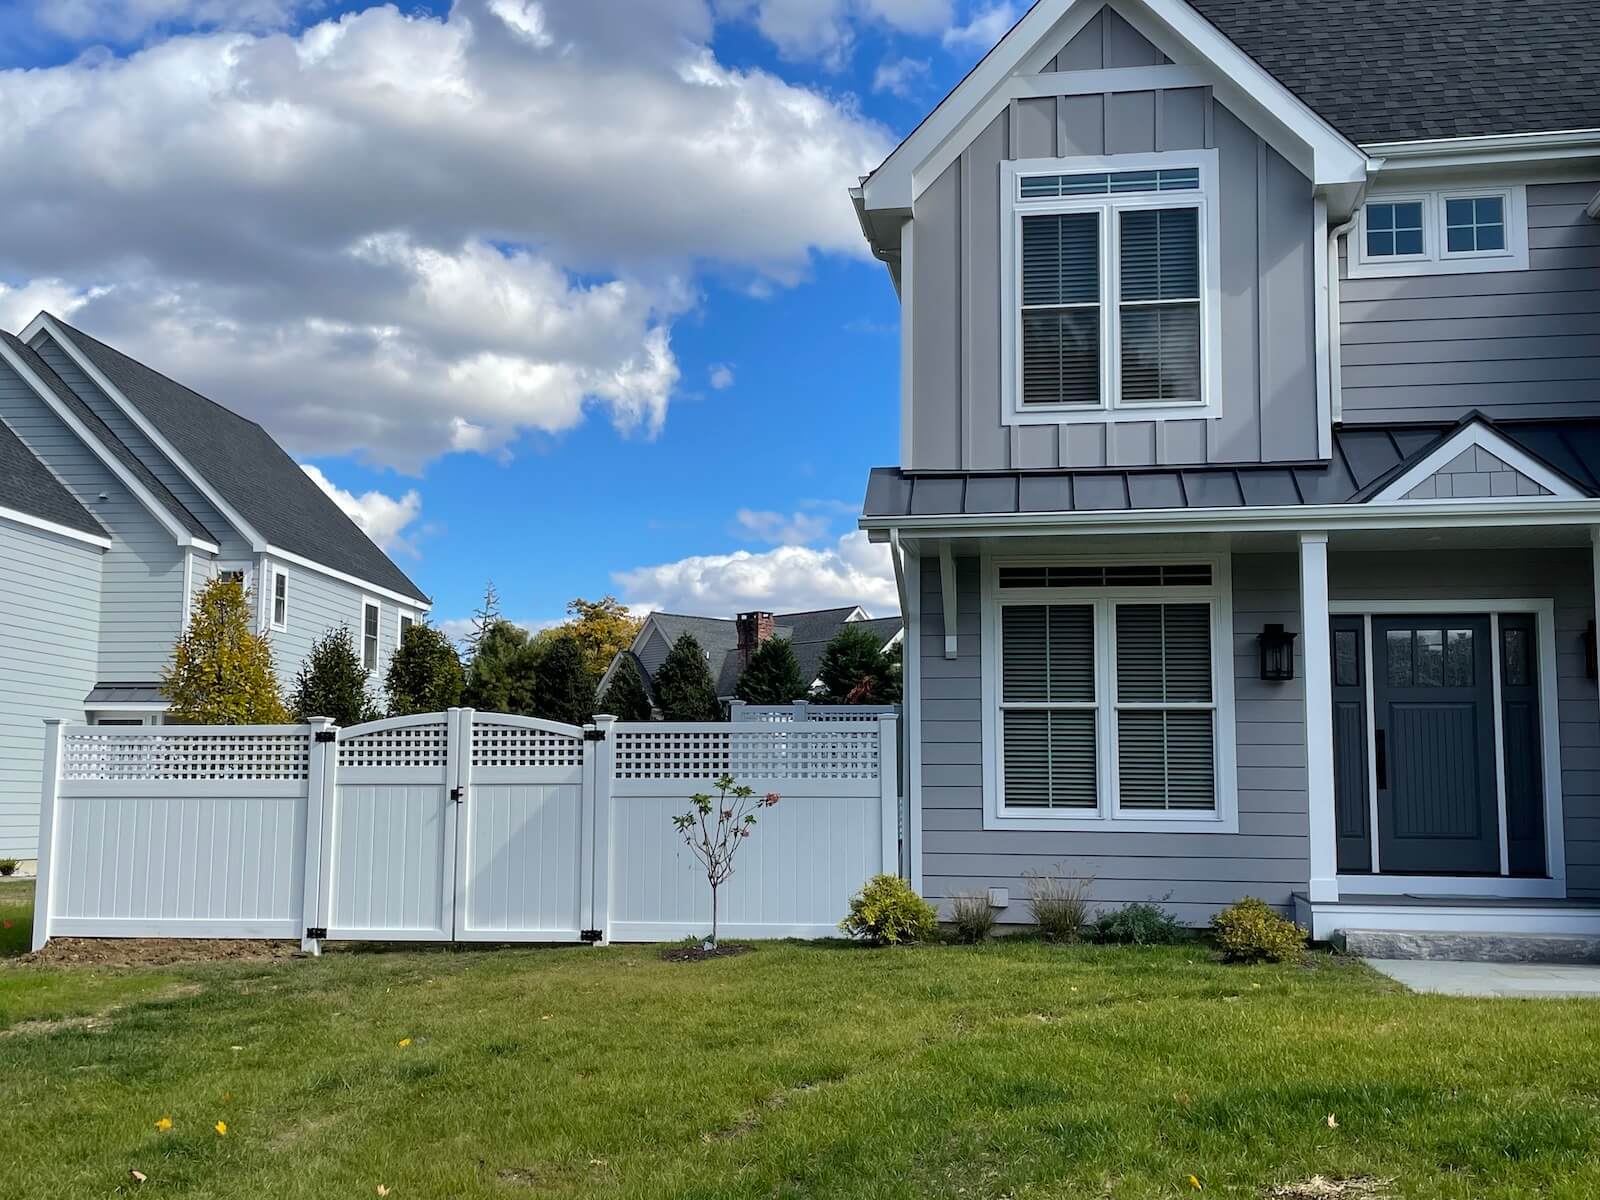 A home with a white fence for added curb appeal and white siding.